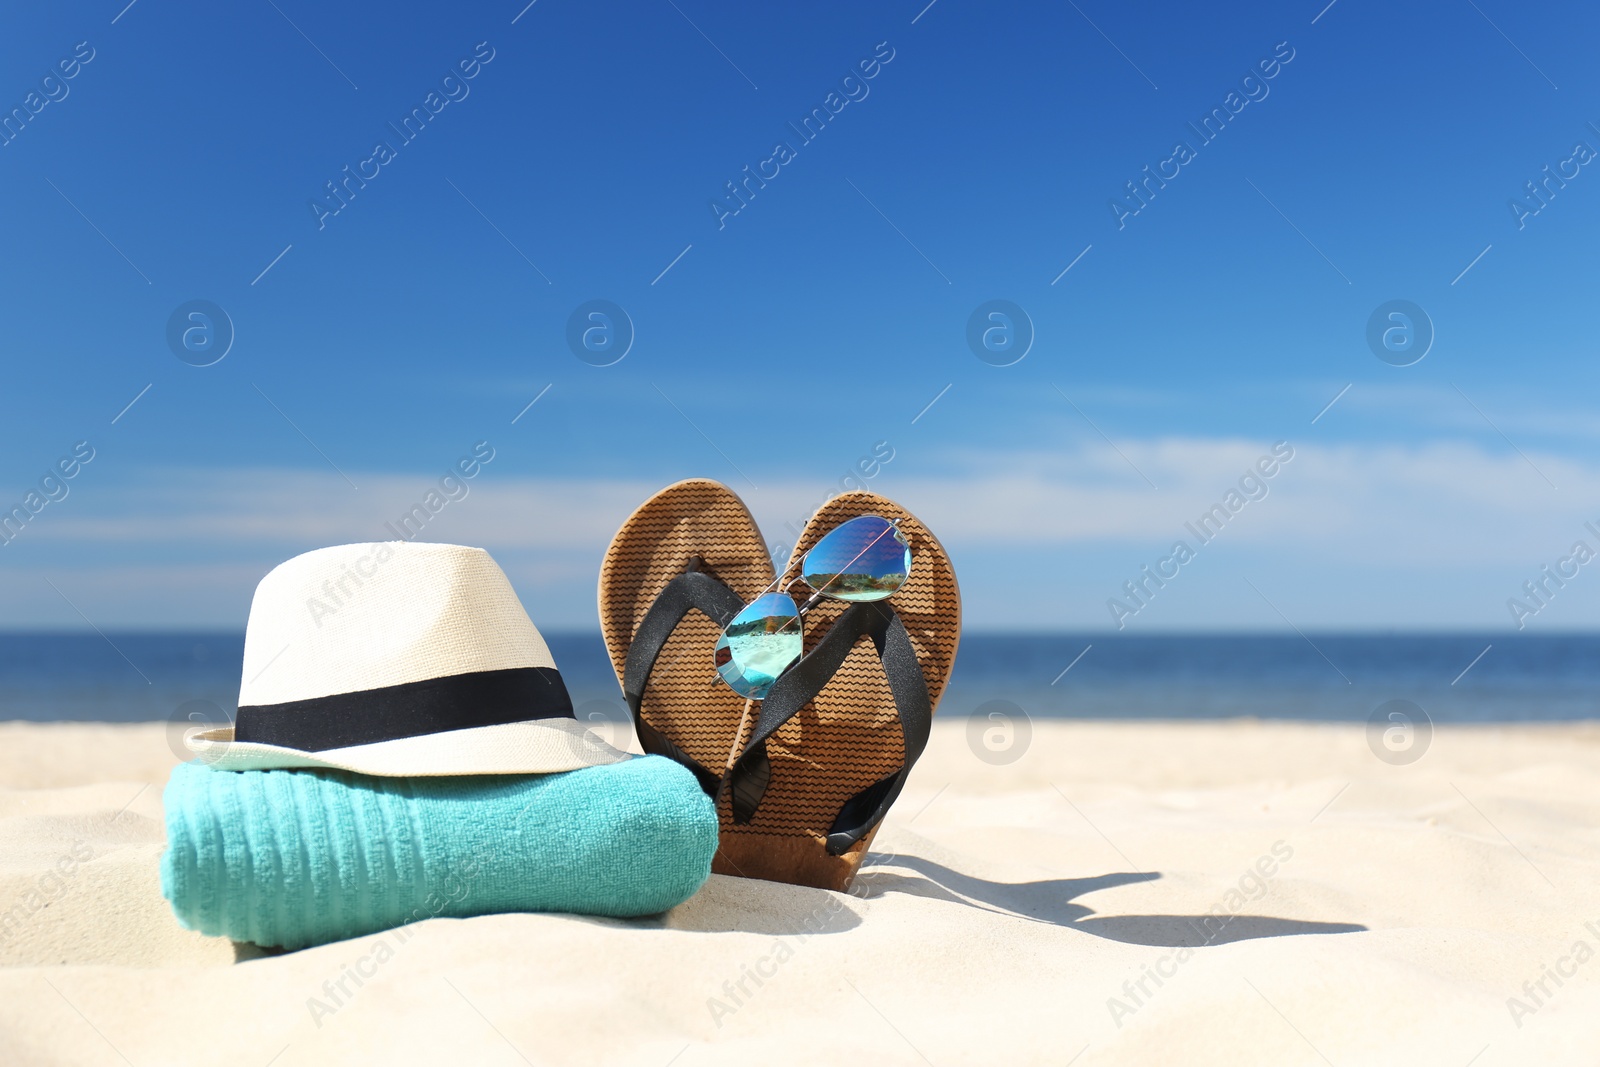 Photo of Stylish beach accessories for summer vacation on sand near sea. Space for text